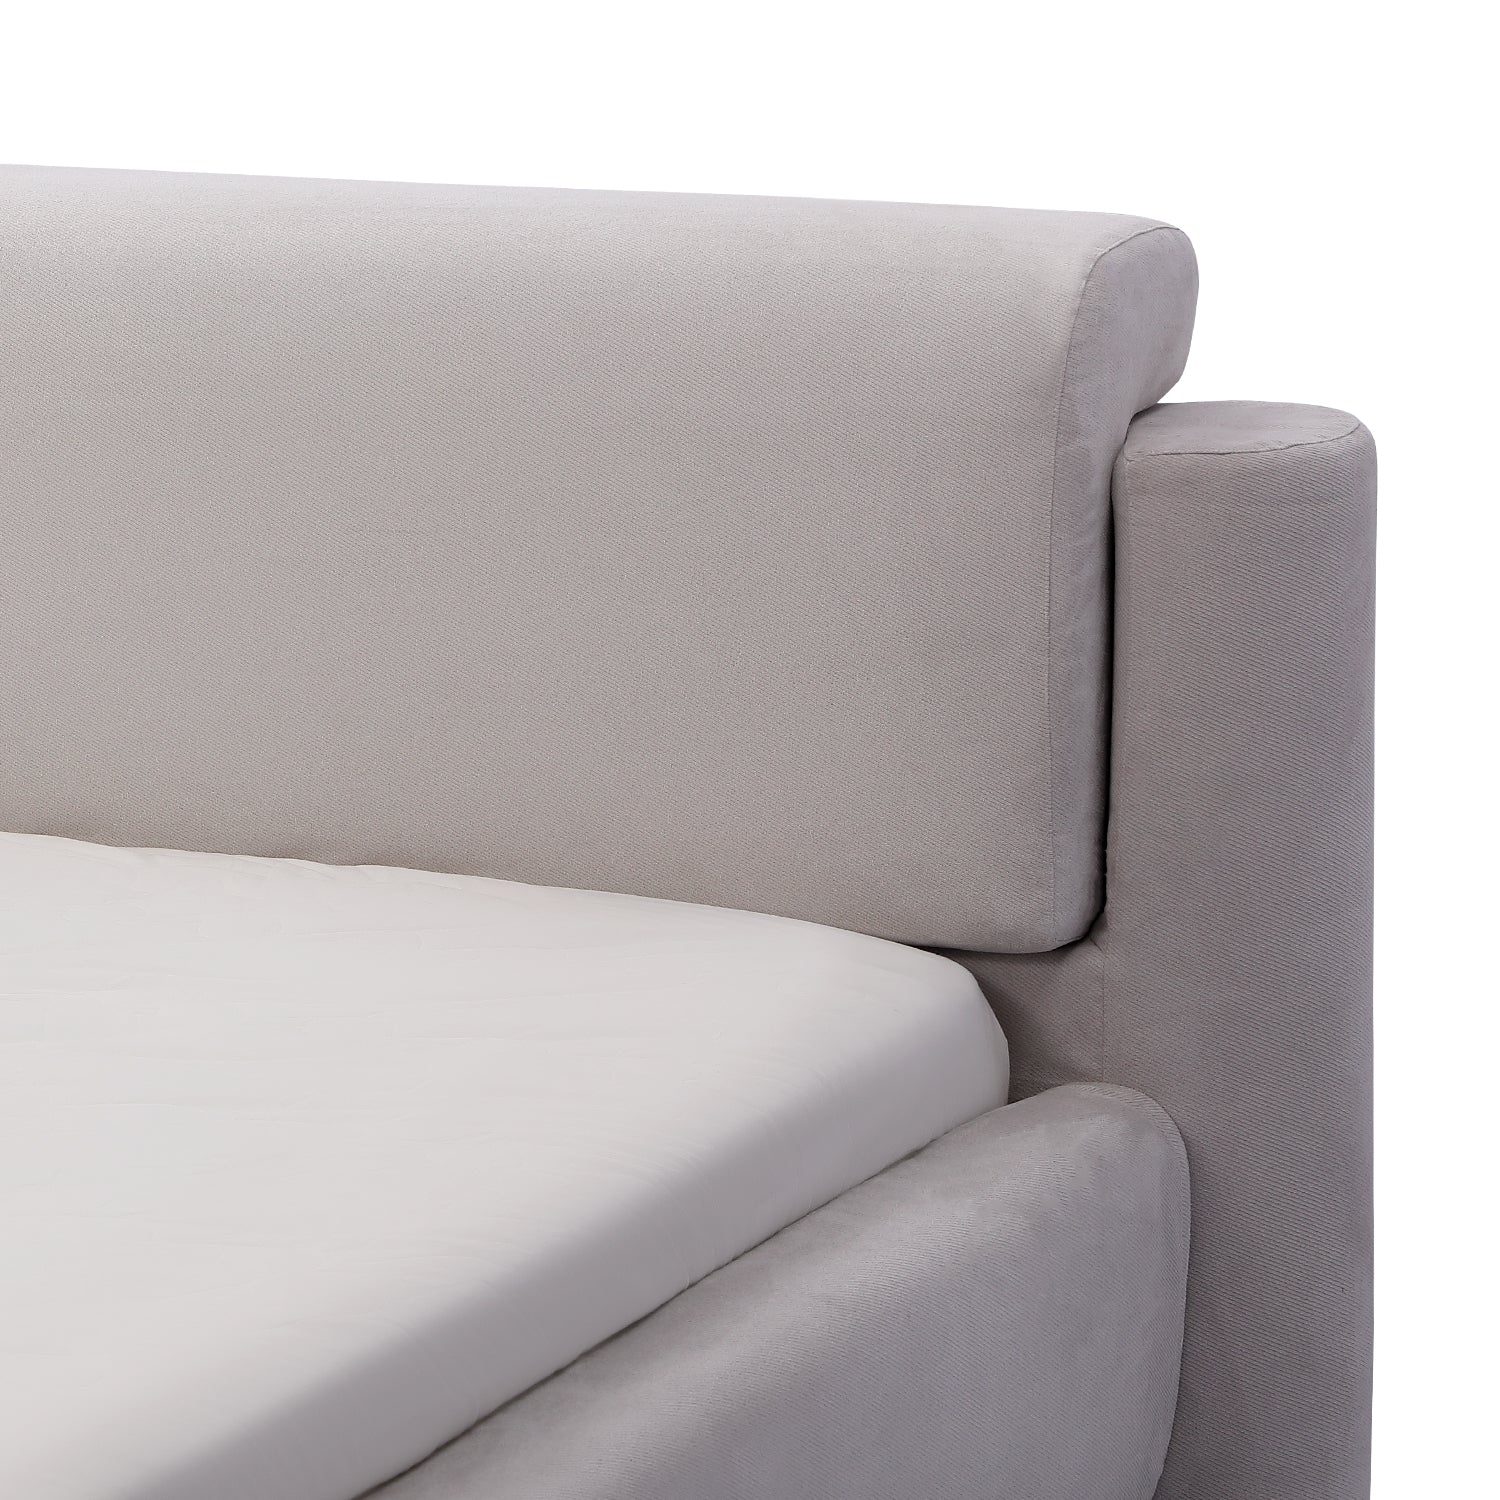 Close-up of DeRUCCI Bed Frame BZZ4 - 082 with grey fabric upholstery and modern minimalist design elements.